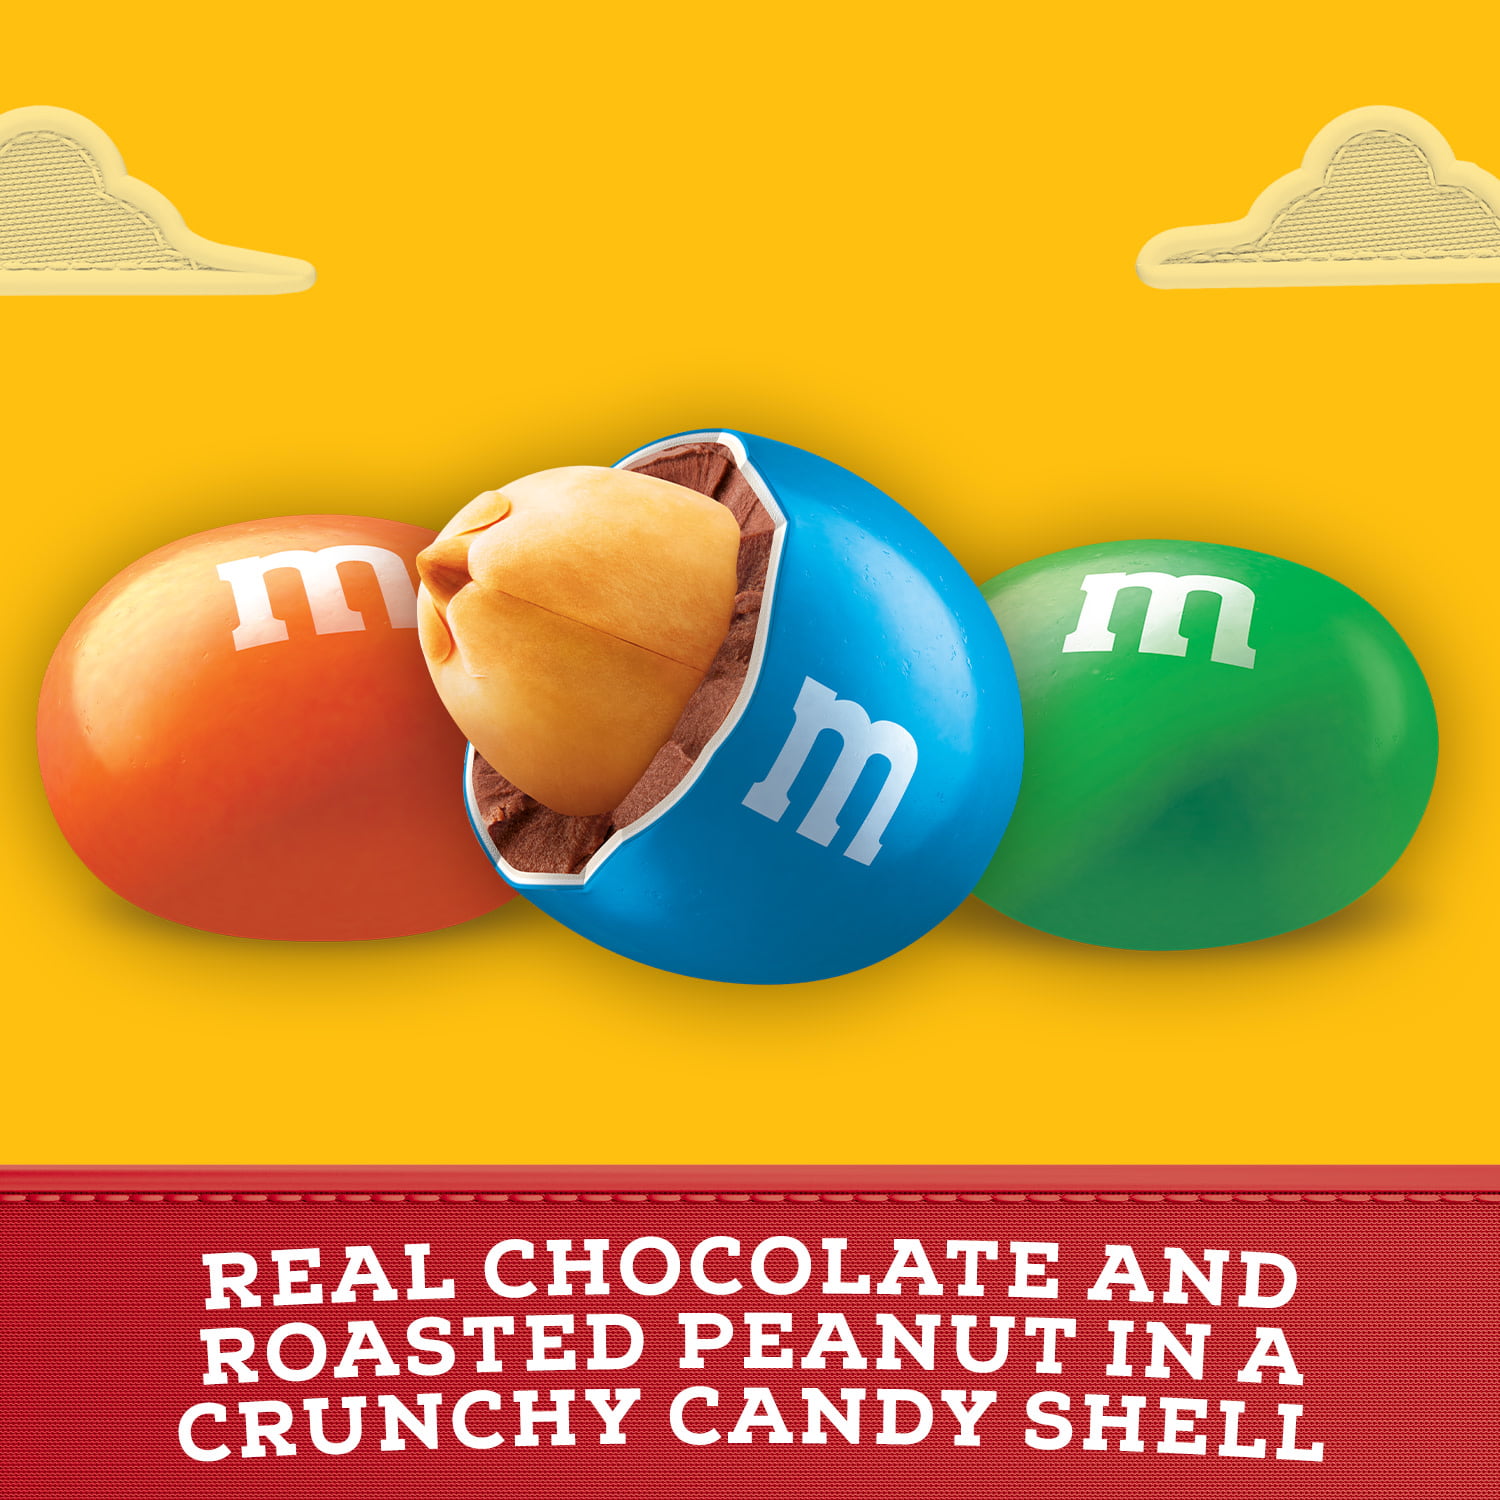 M&M'S Limited Edition Peanut Milk Chocolate Candy featuring Purple Candy Bag,  1.74 oz - King Soopers